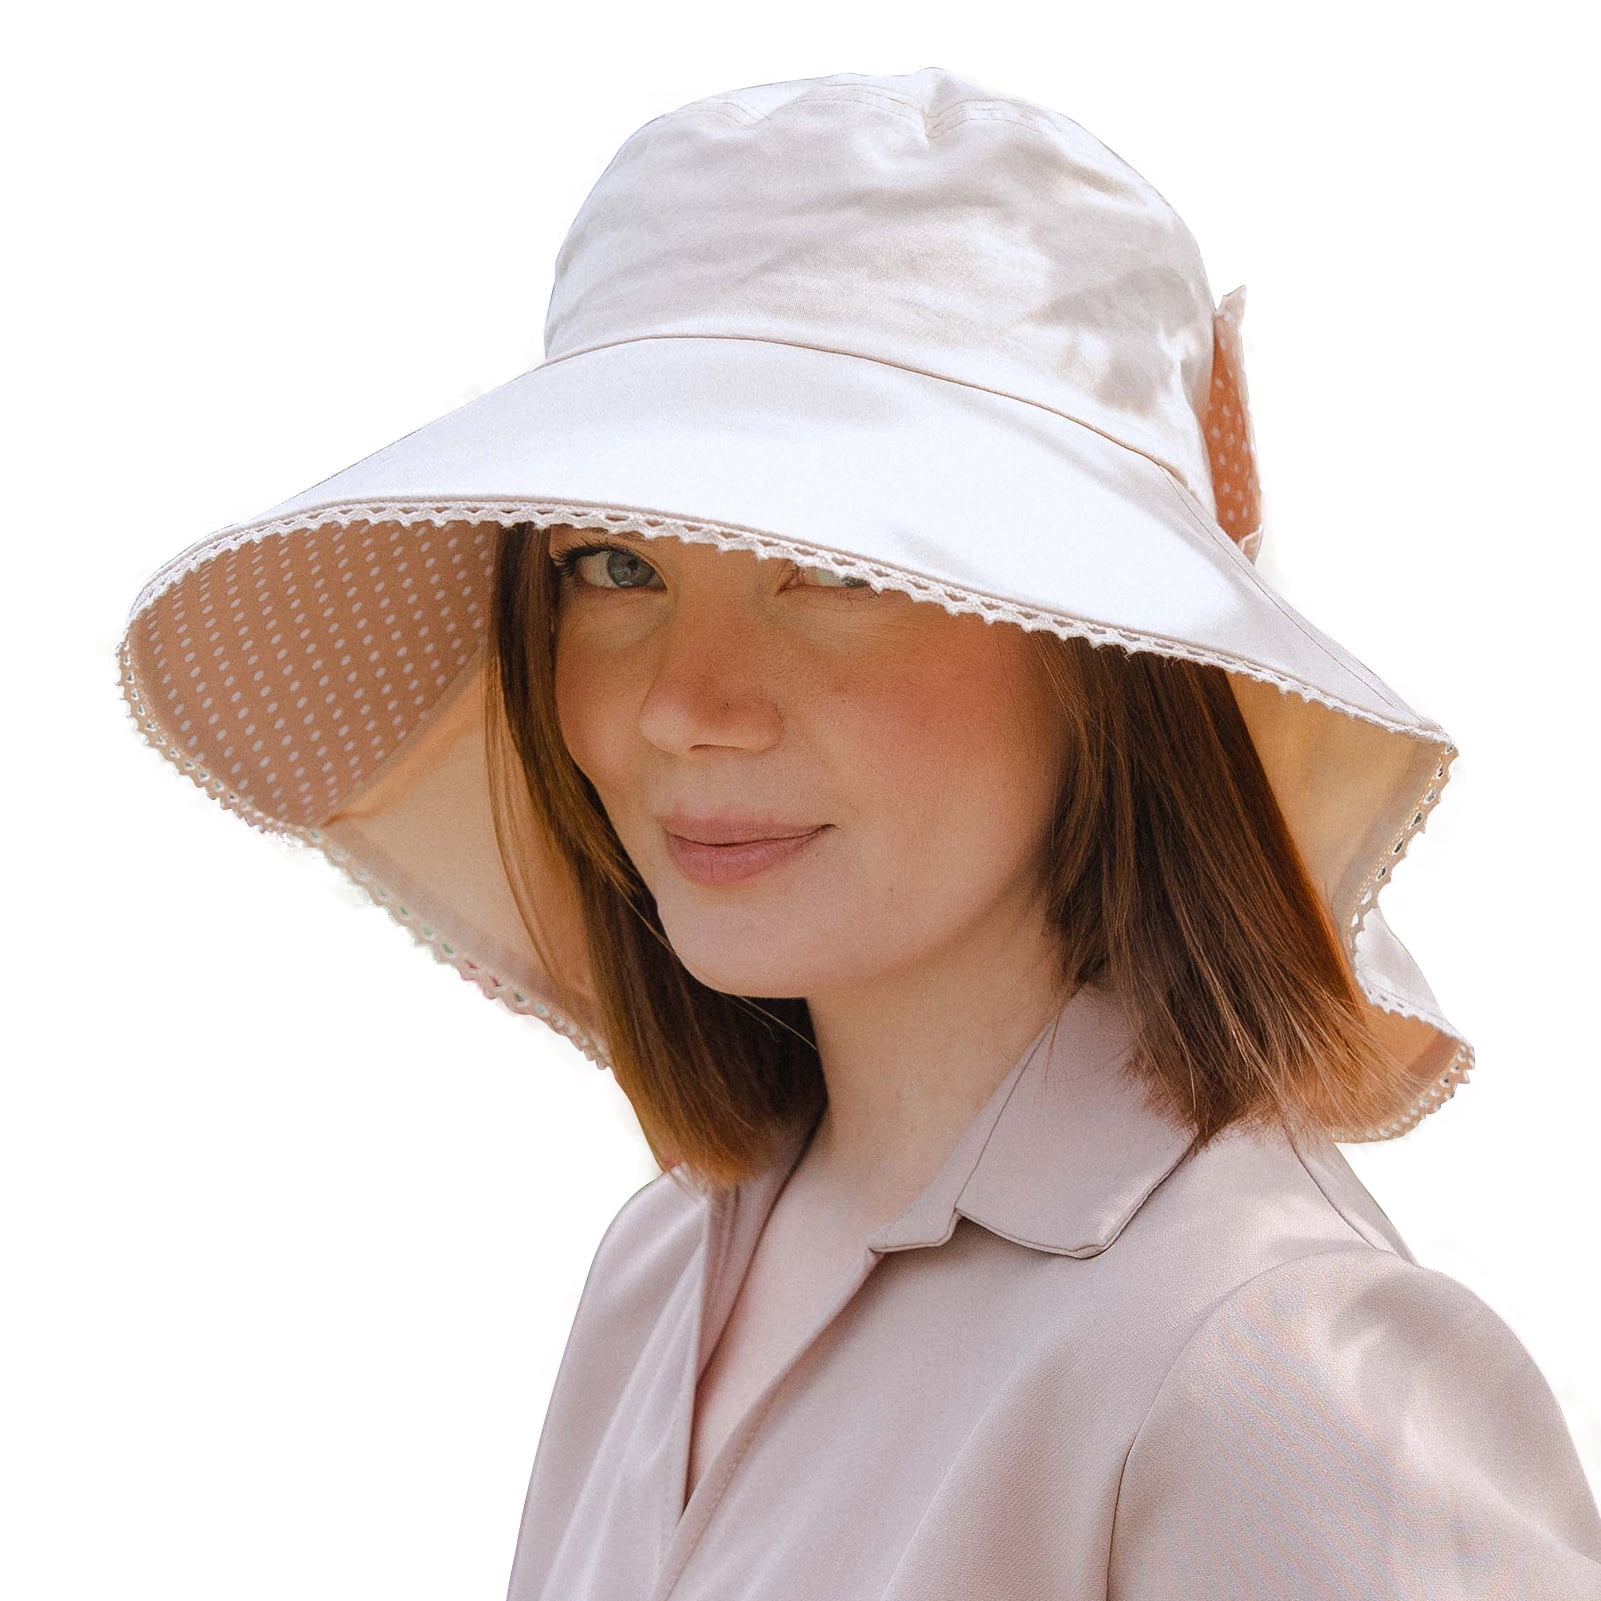 Comhats Sun Hat Women Packable UPF 50 Wide Brim with Neck Flap UV Cotton  Safari Gardening with String Black Large 59-61CM 